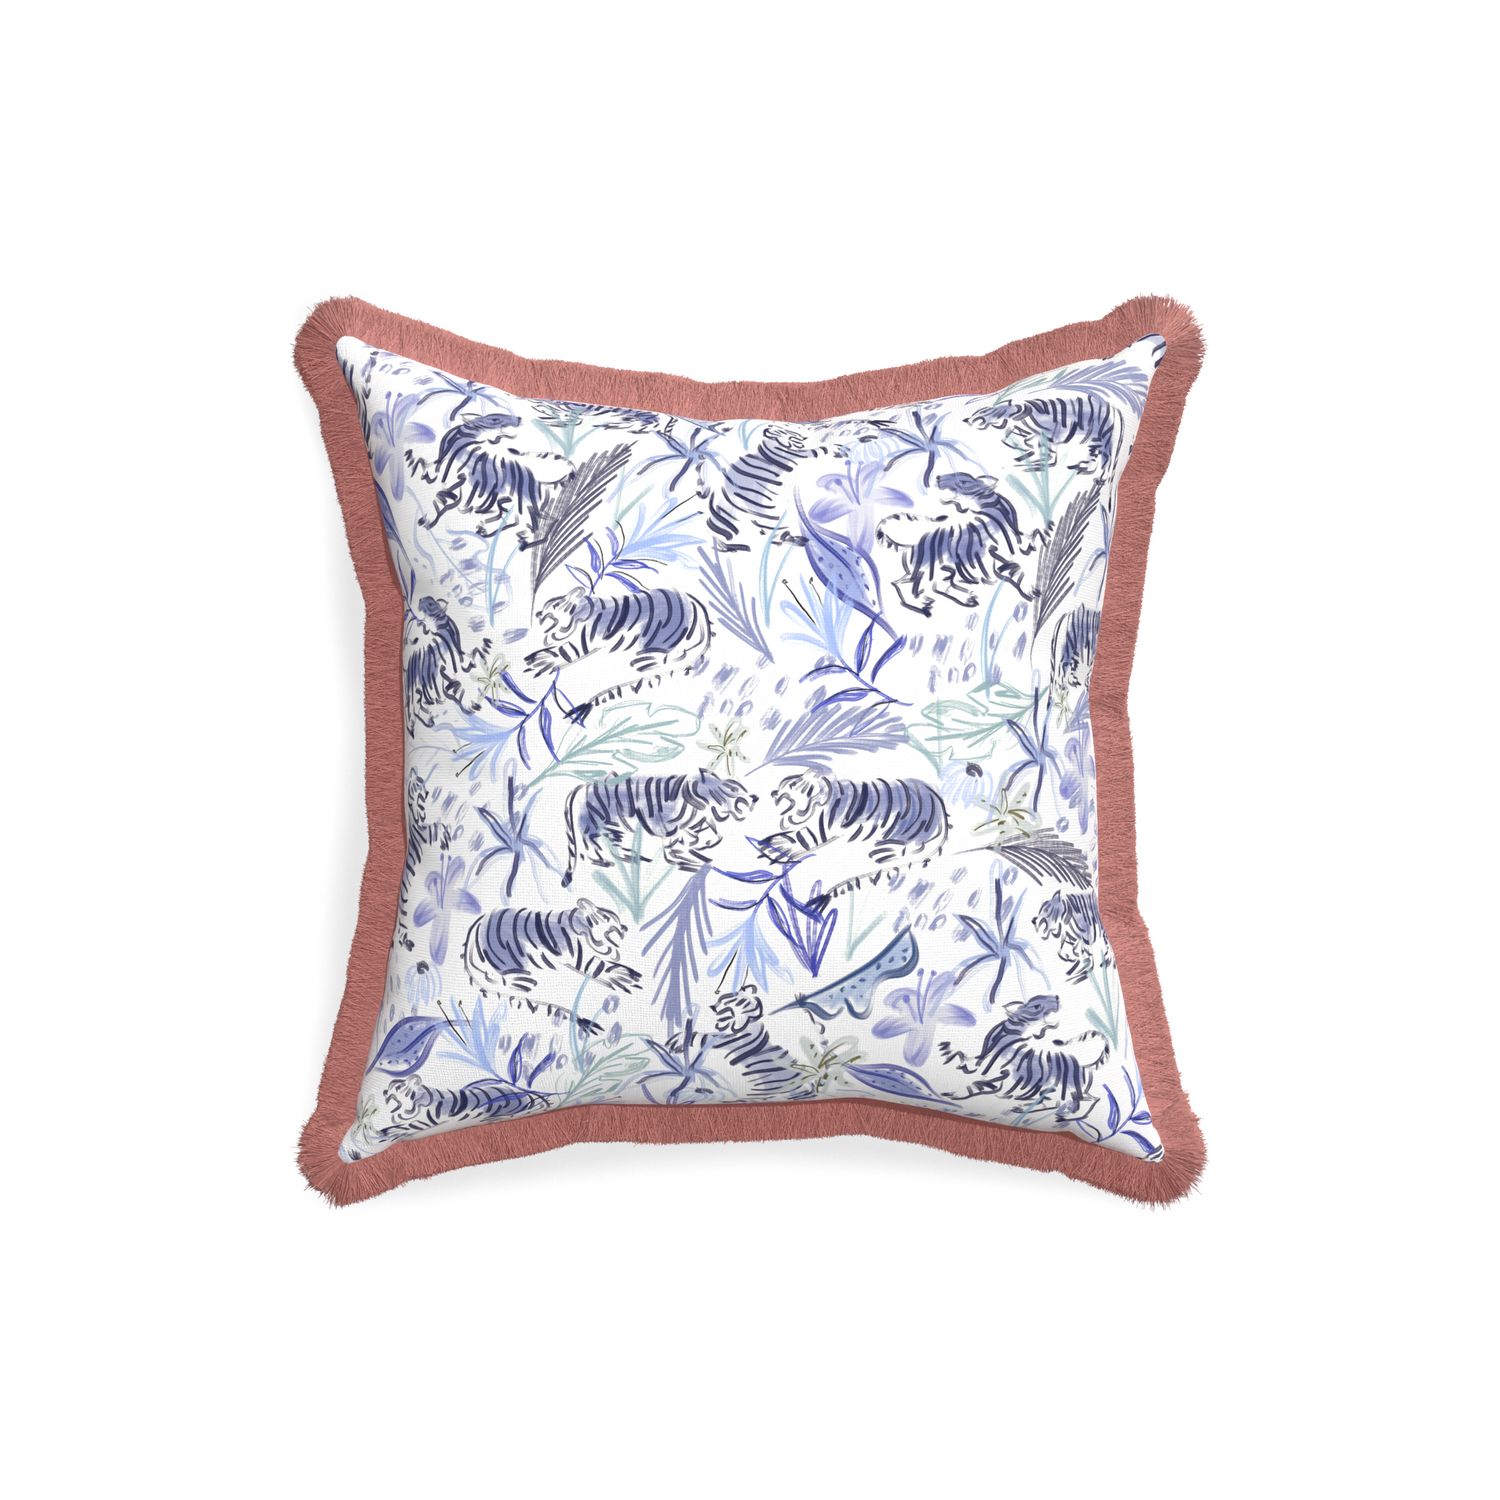 18-square frida blue custom blue with intricate tiger designpillow with d fringe on white background